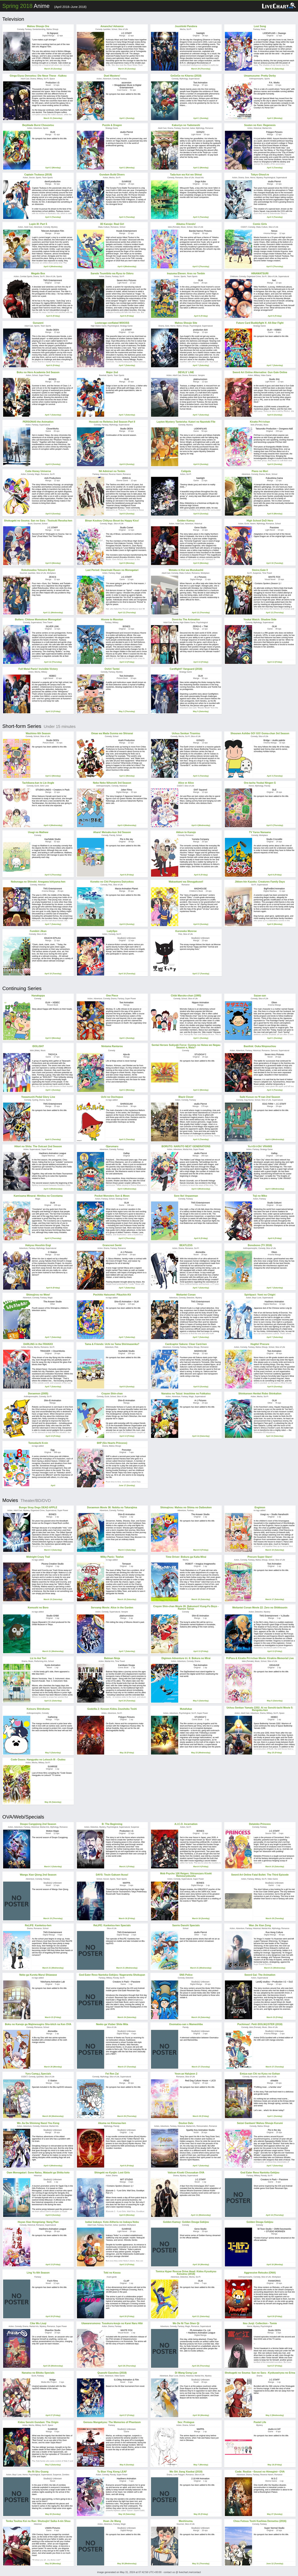 Spring 2018 Anime Chart - All